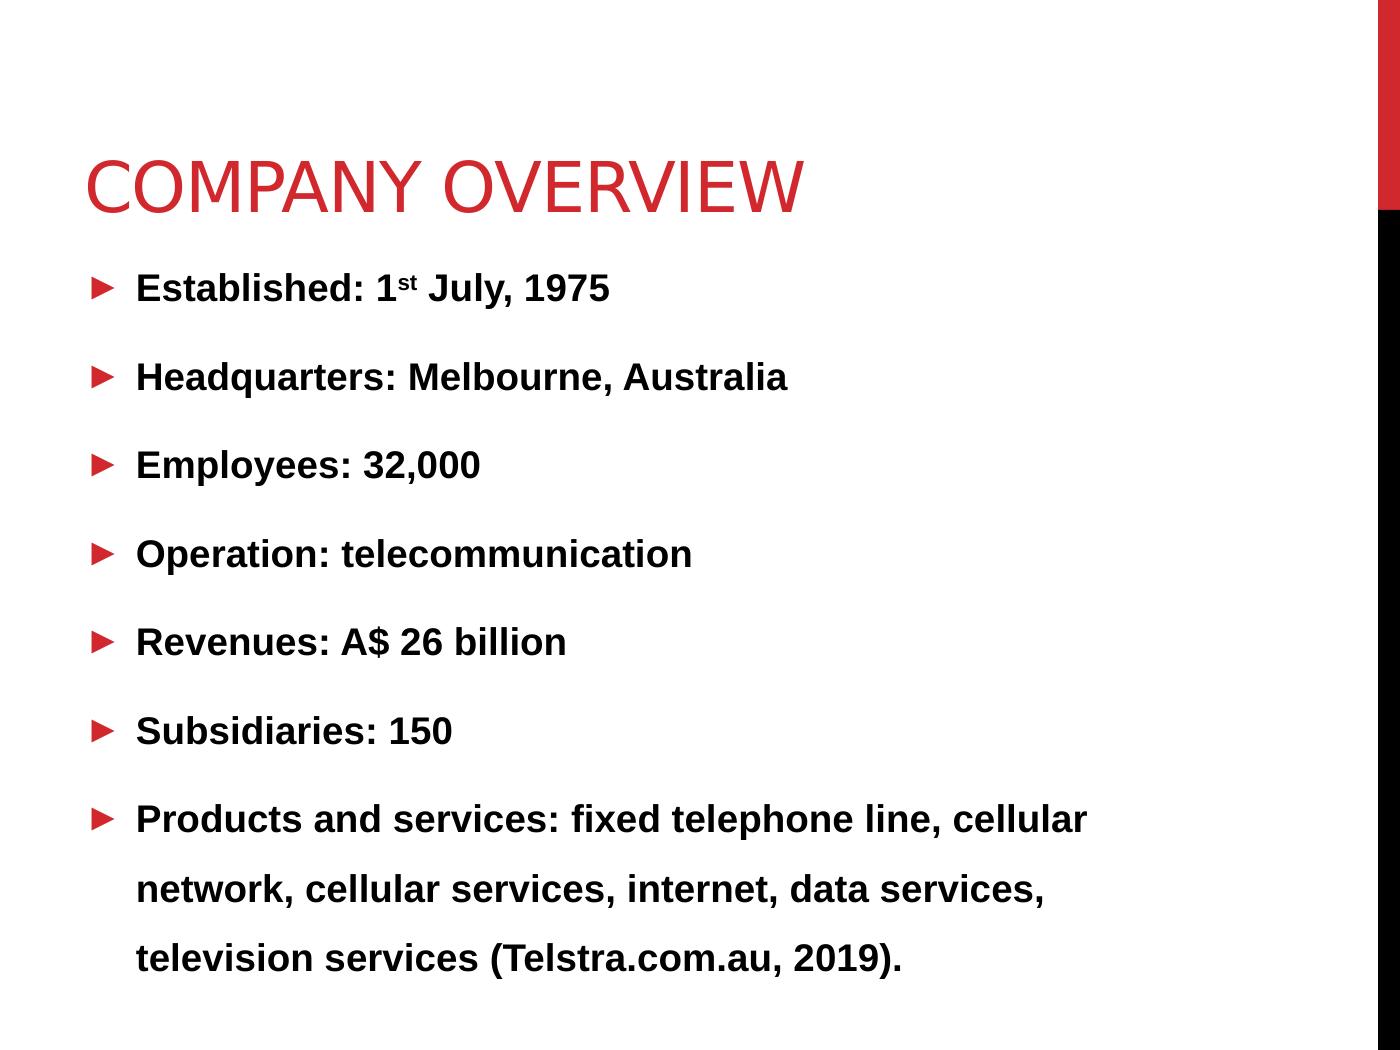 Telstra: Corporate Governance, Ethics and Corporate Social Responsibility_3